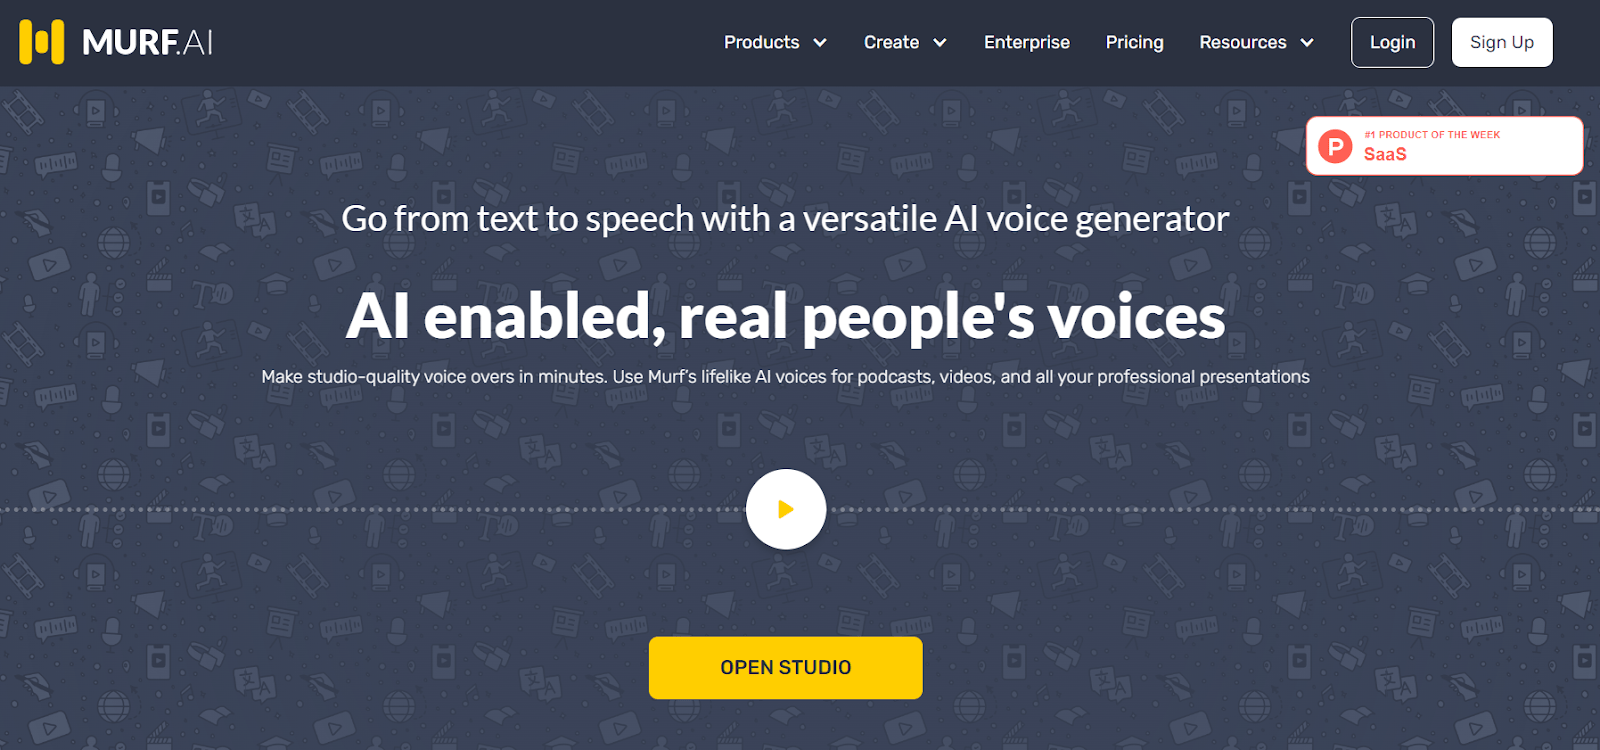 murf ai website - ai enabled, real people's voices